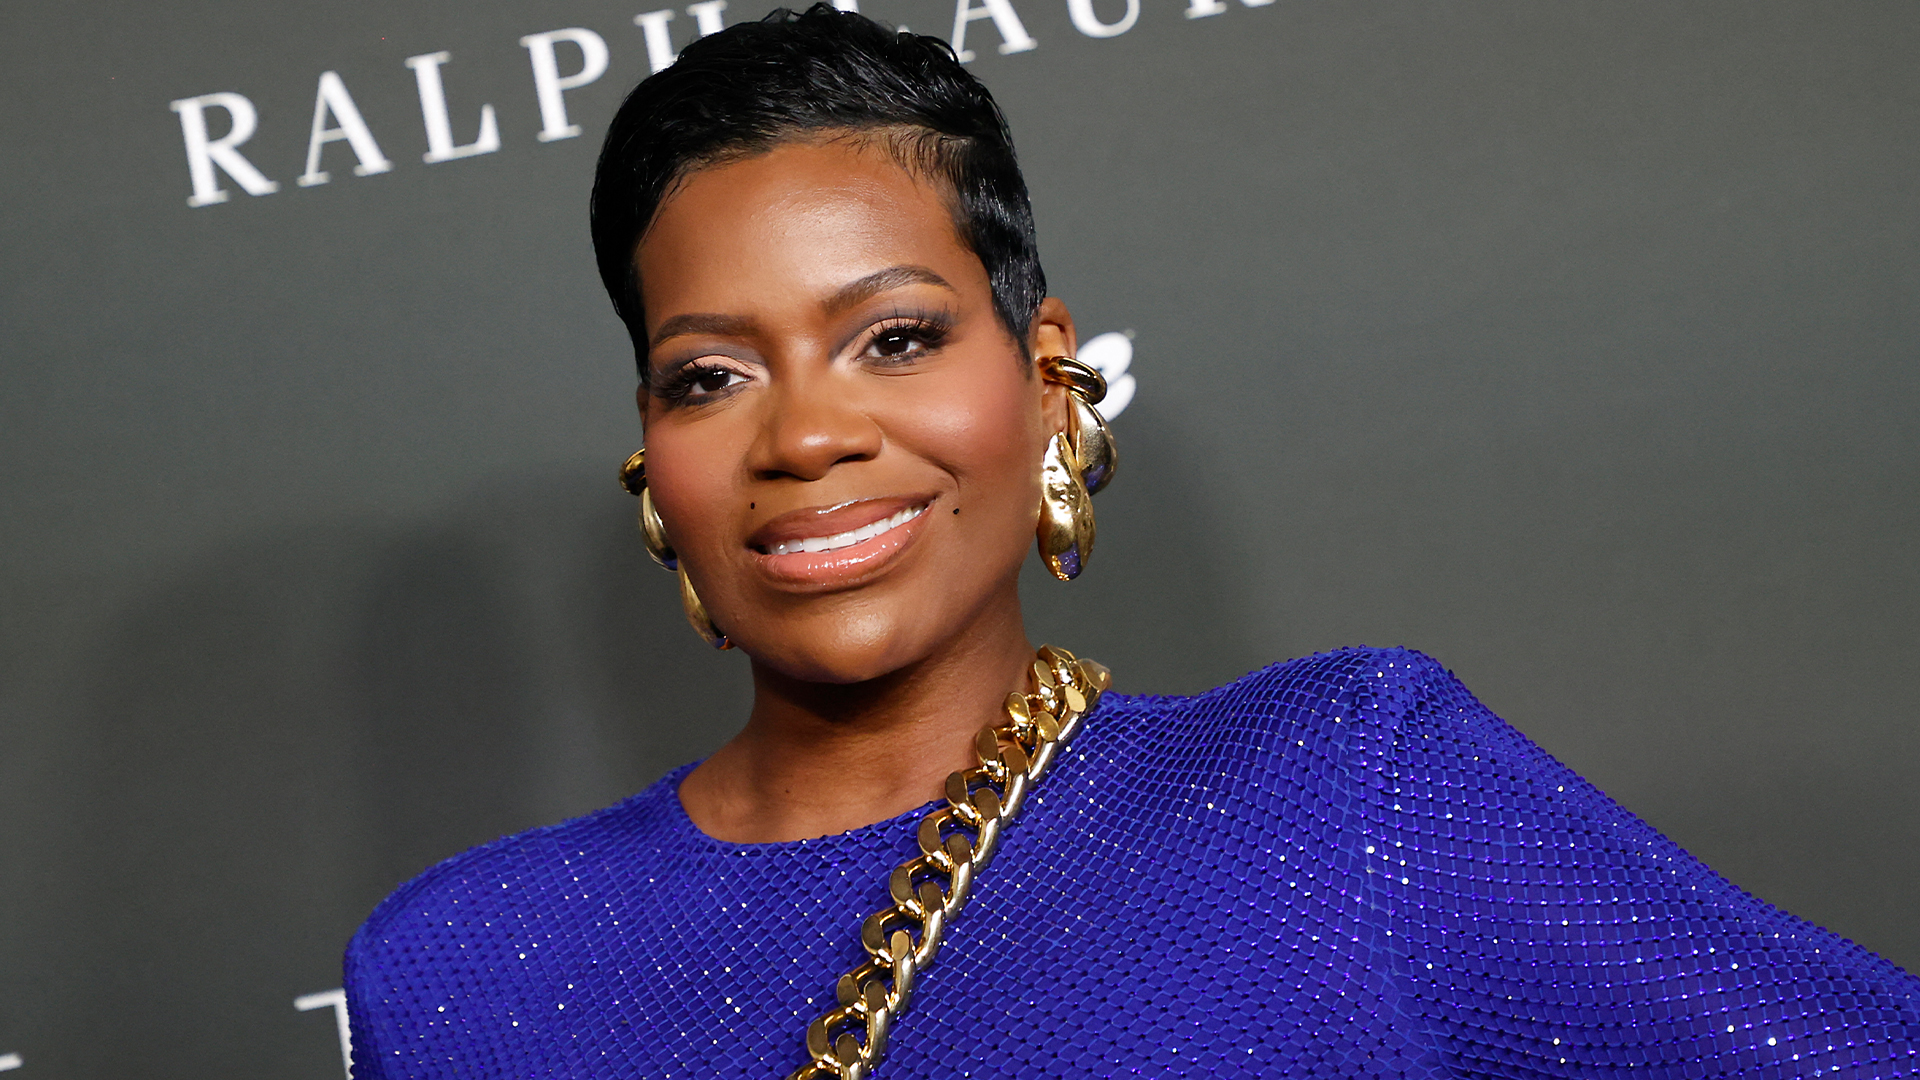 Fantasia Barrino Was Once Served For Owing $1M In Taxes — 'They Said My House Was Going To Be Put Up For Auction'